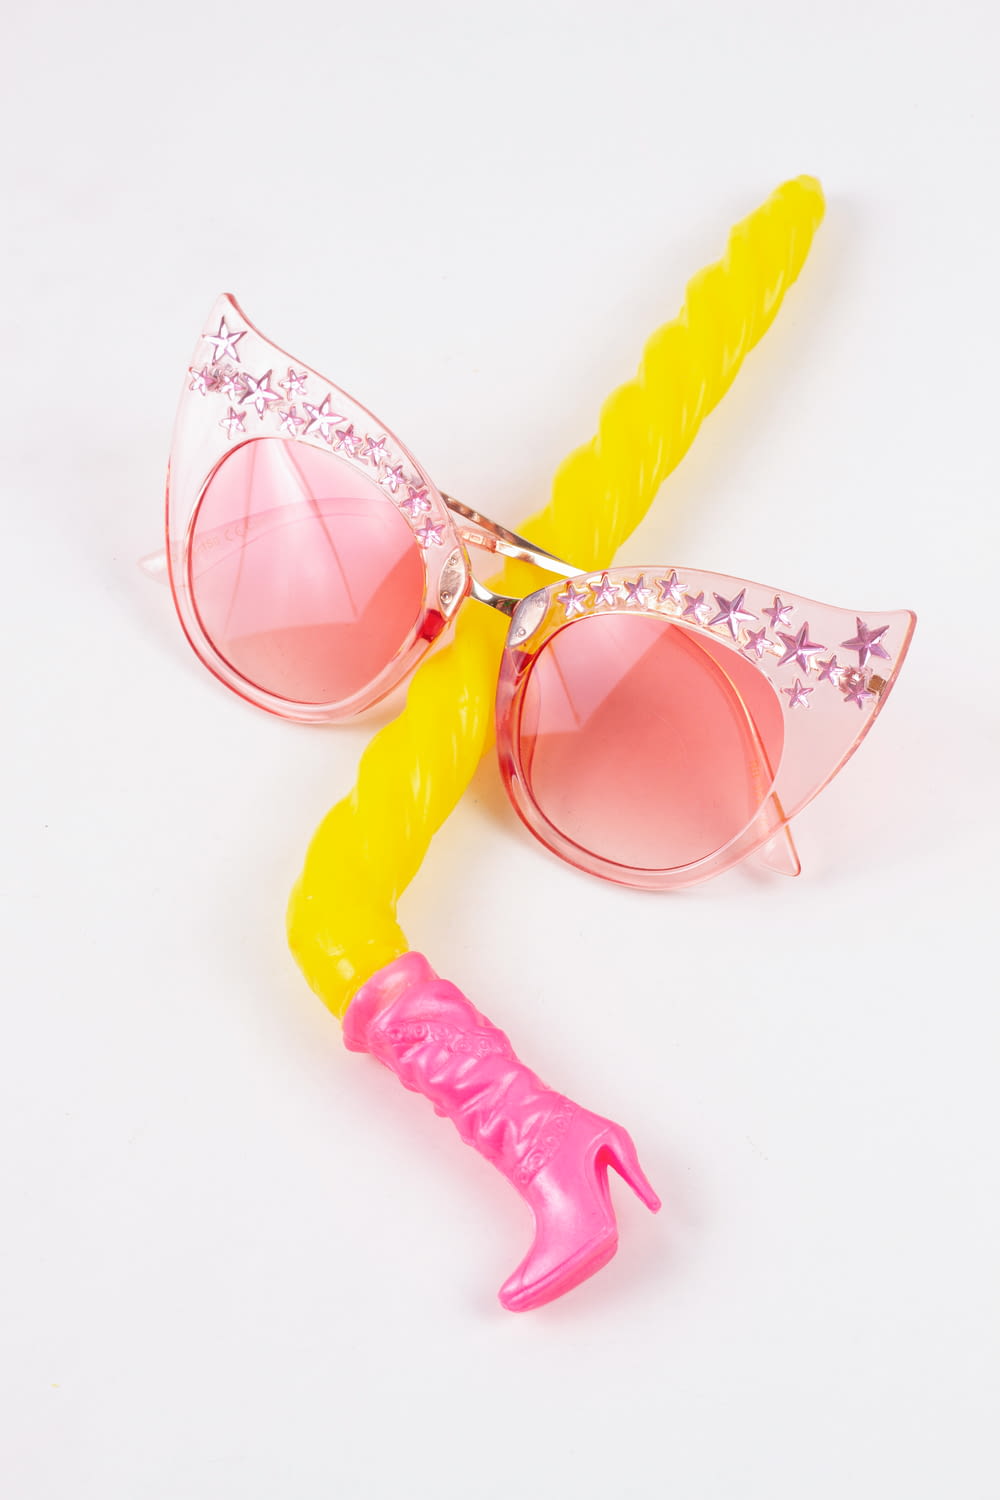 a pair of pink sunglasses with a yellow handle